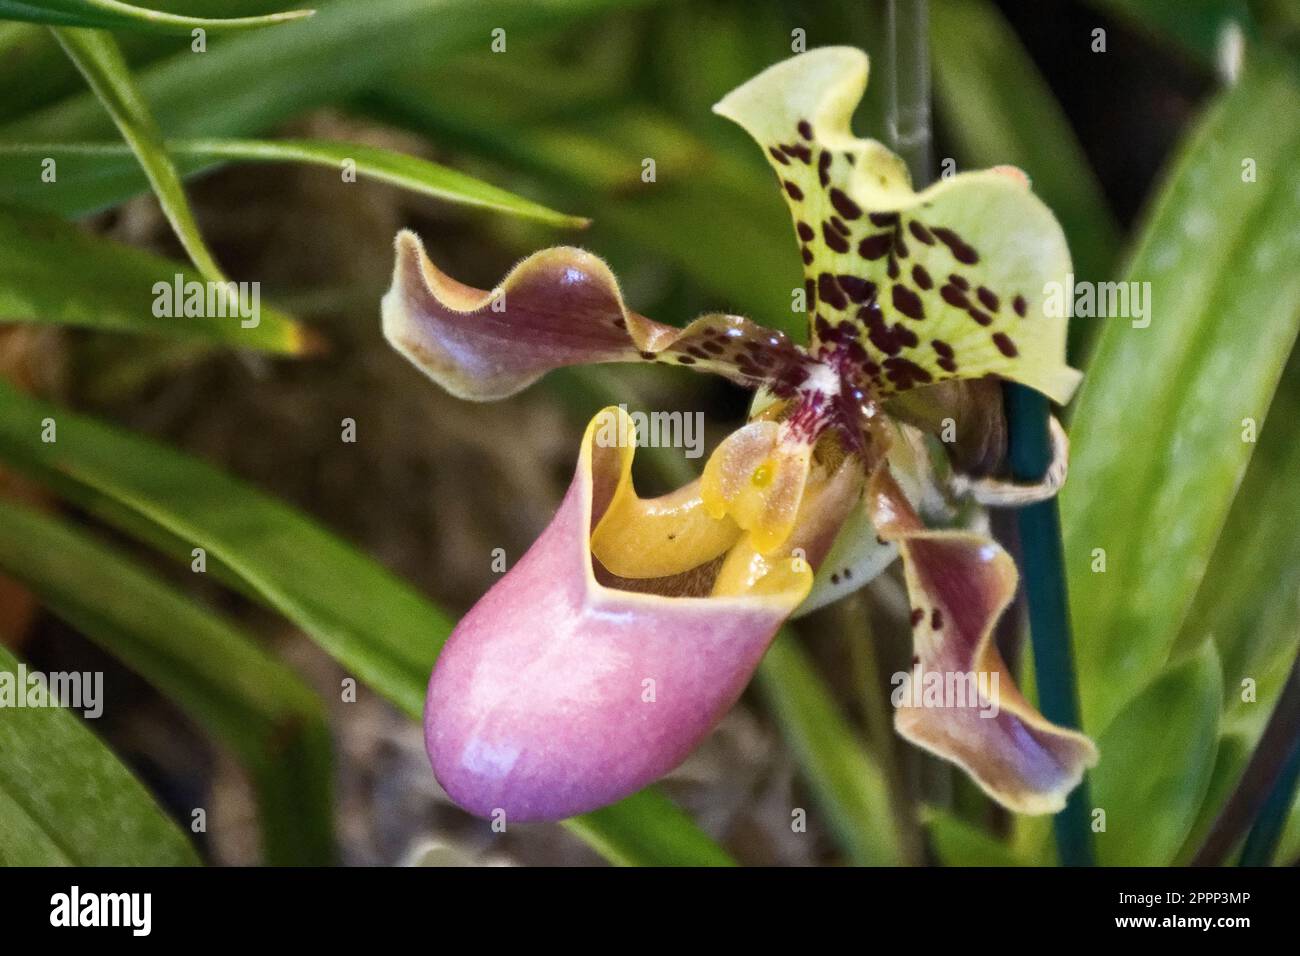 Tropical pink Papiopedilum orchid with yellow petal and green leaves, lady slipper orchid Stock Photo